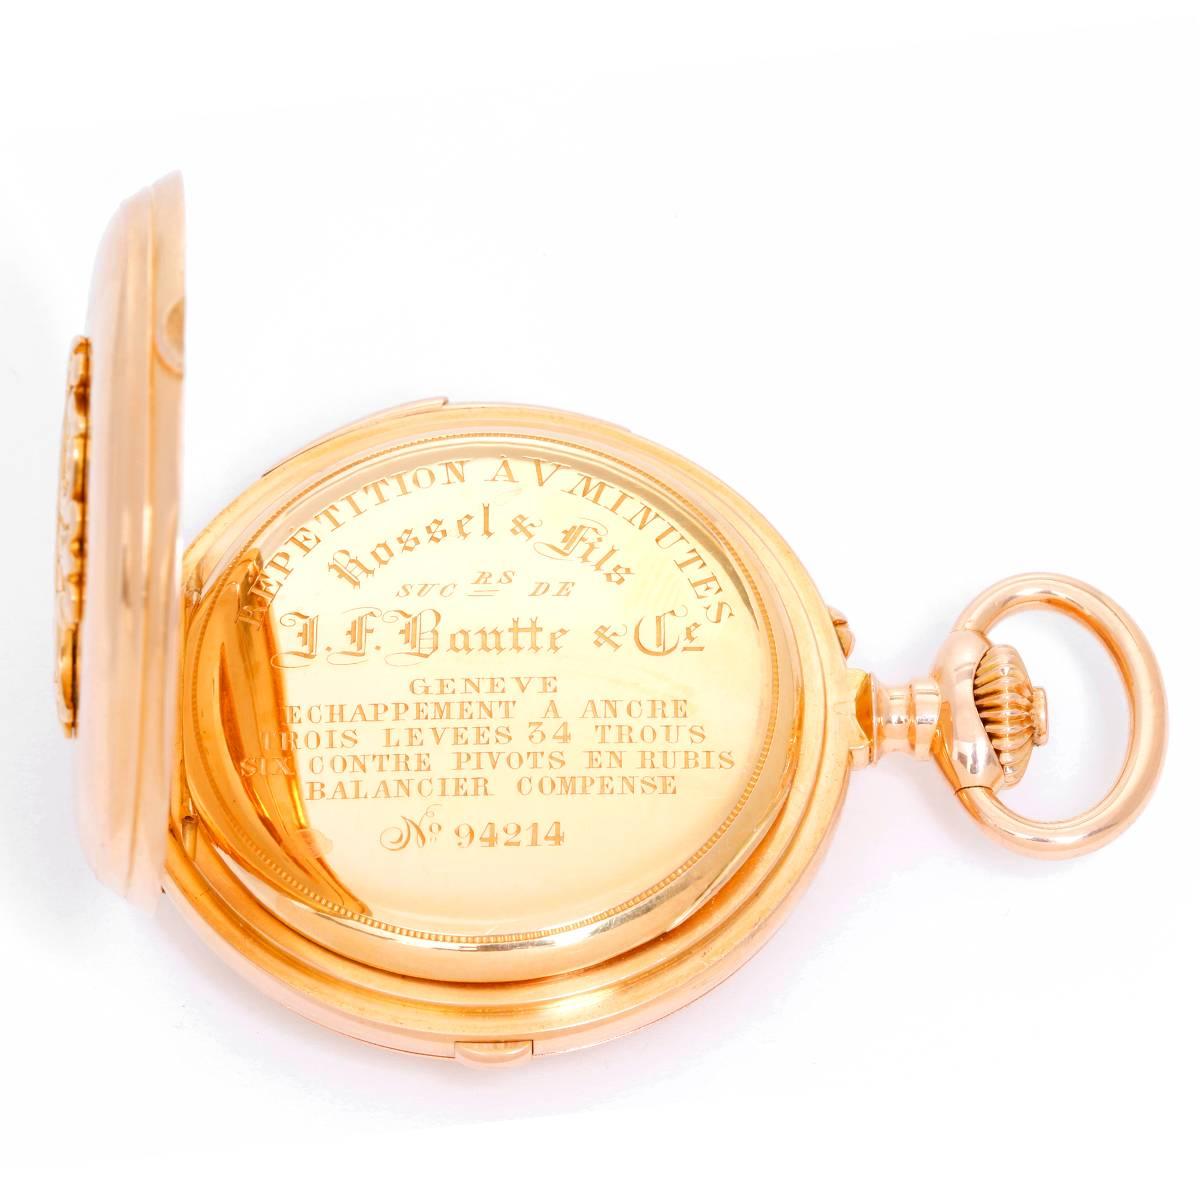 Russel & Fils Retailed by J. F. Bautte & Co. Pocket Watch -  Manual. Raised Gold Monogram case front and back. White dial with Roman numerals. Very rare 2- Train 5 minute repeater with independent sweep start stop dead seconds hand;